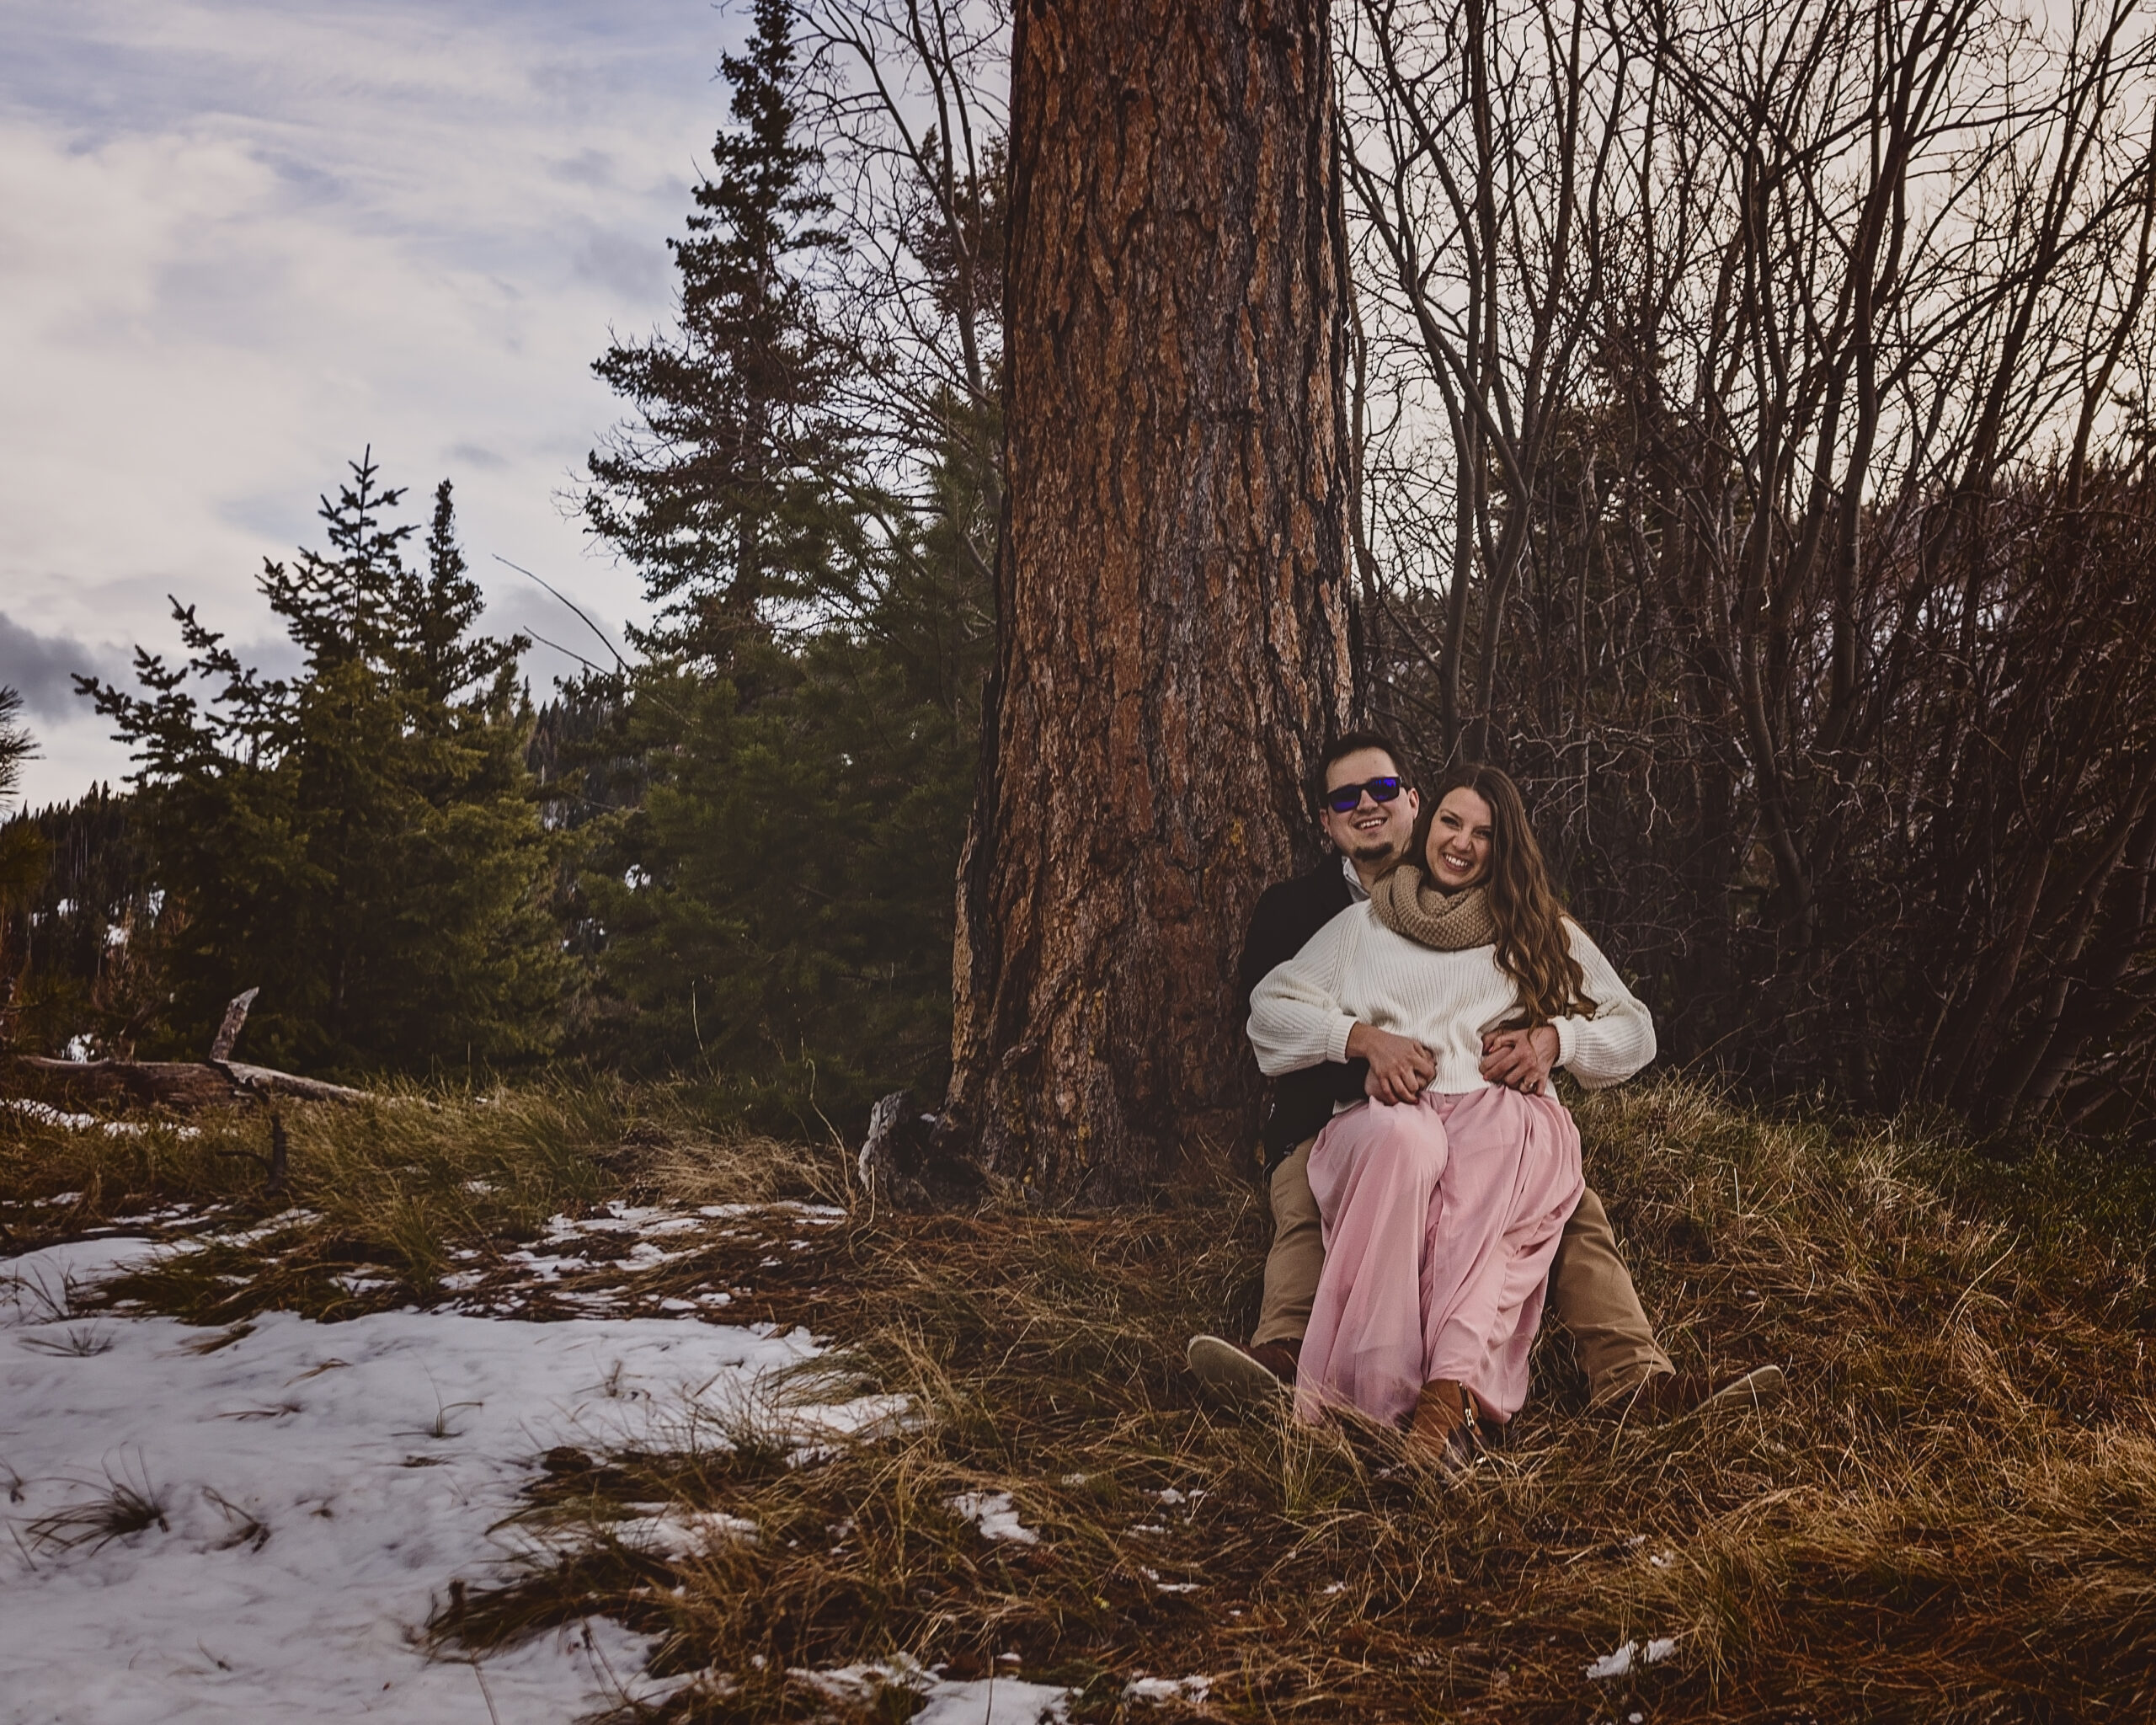 Experience the breathtaking beauty of a romantic mountain engagement